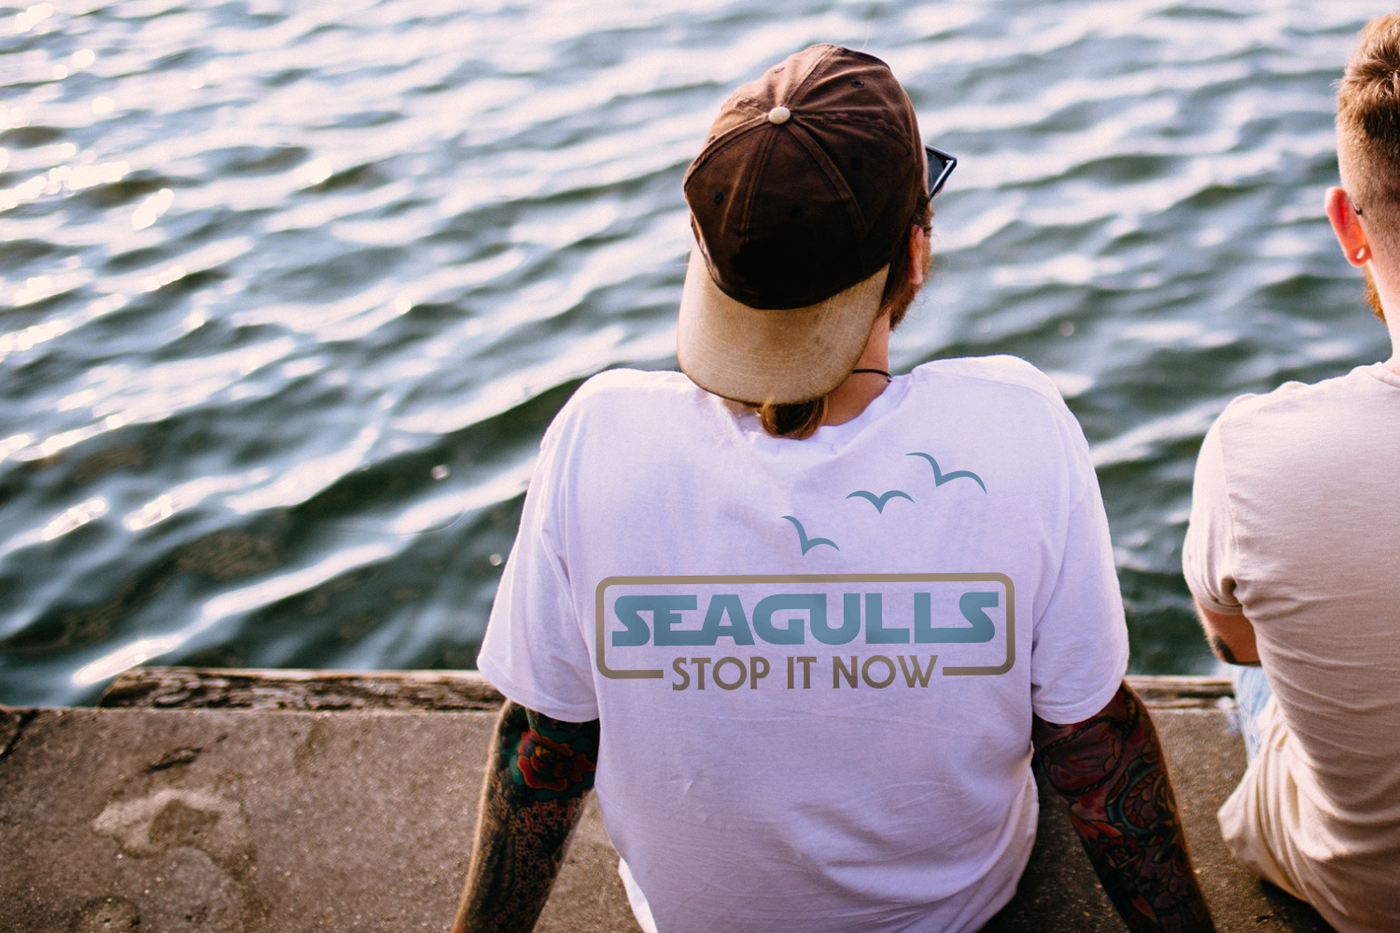 Two white men sit on a dock and are seen from the back. One man has a design on the back of his shirt that says "Seagulls stop it now" with 3 birds flying